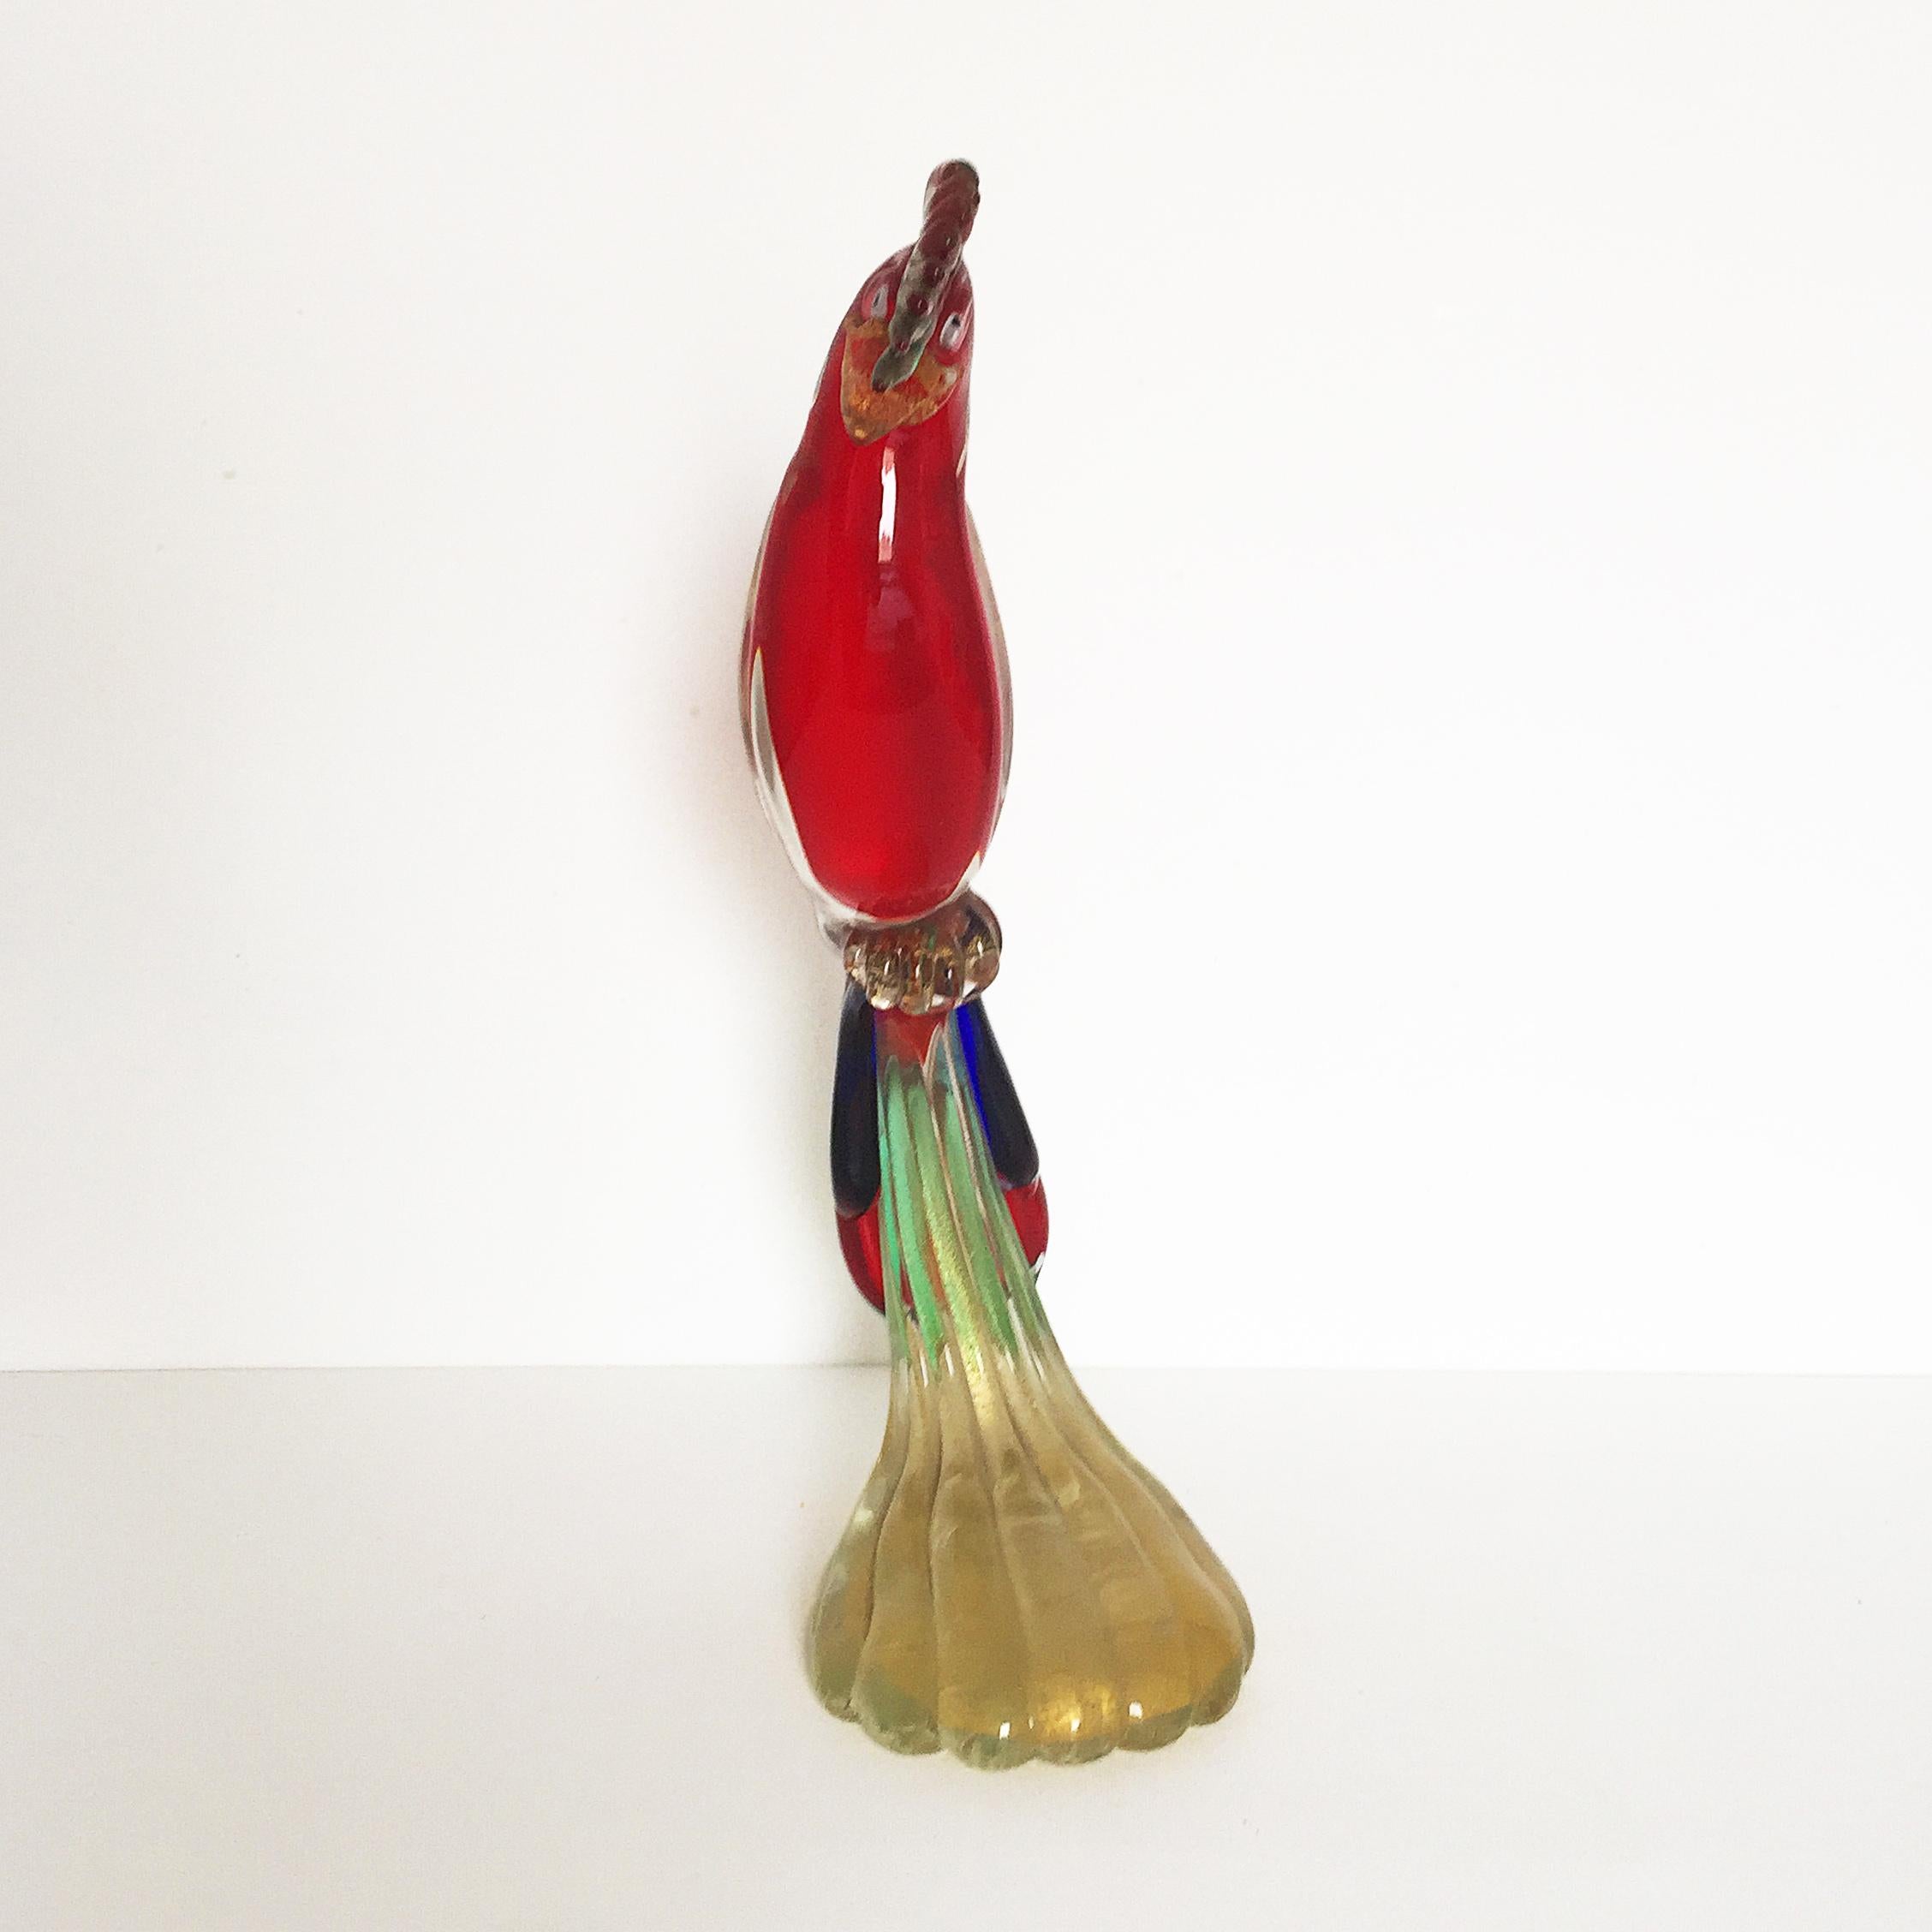 Rare extra large of about 18” tall handblown Gambaro & Poggi Murano glass parrot with gold flecks and their distinctive base. Cheeky looking parrot in red, blue, green, clear and gold flecks base.